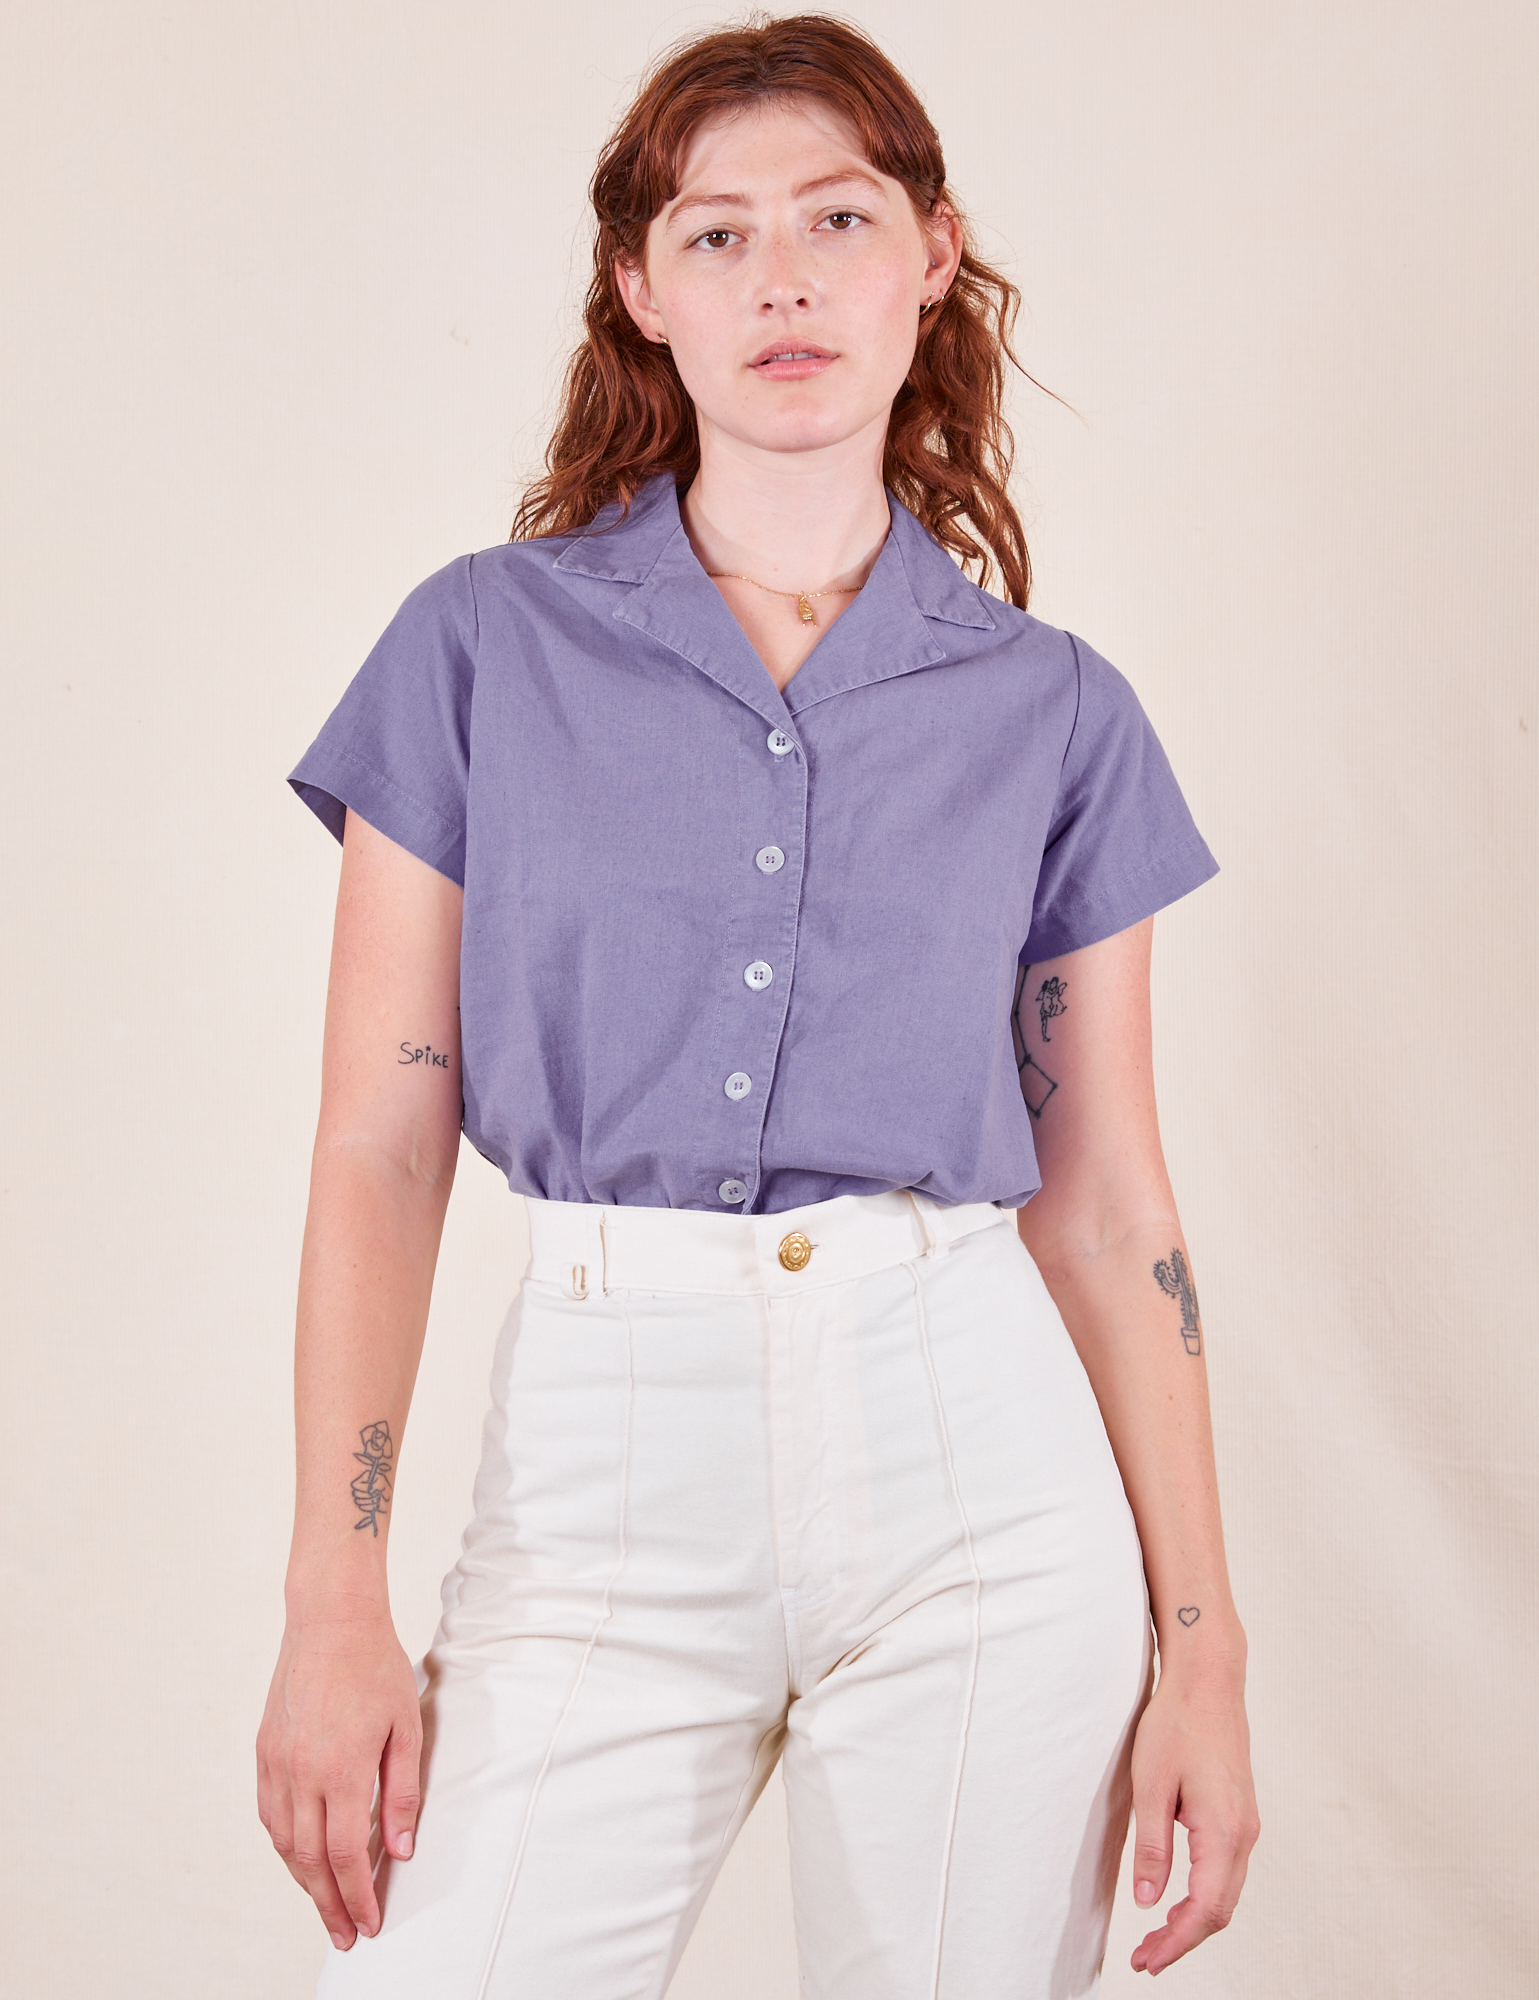 Alex is wearing P Pantry Button-Up in Faded Grape tucked into vintage tee off-white Western Pants